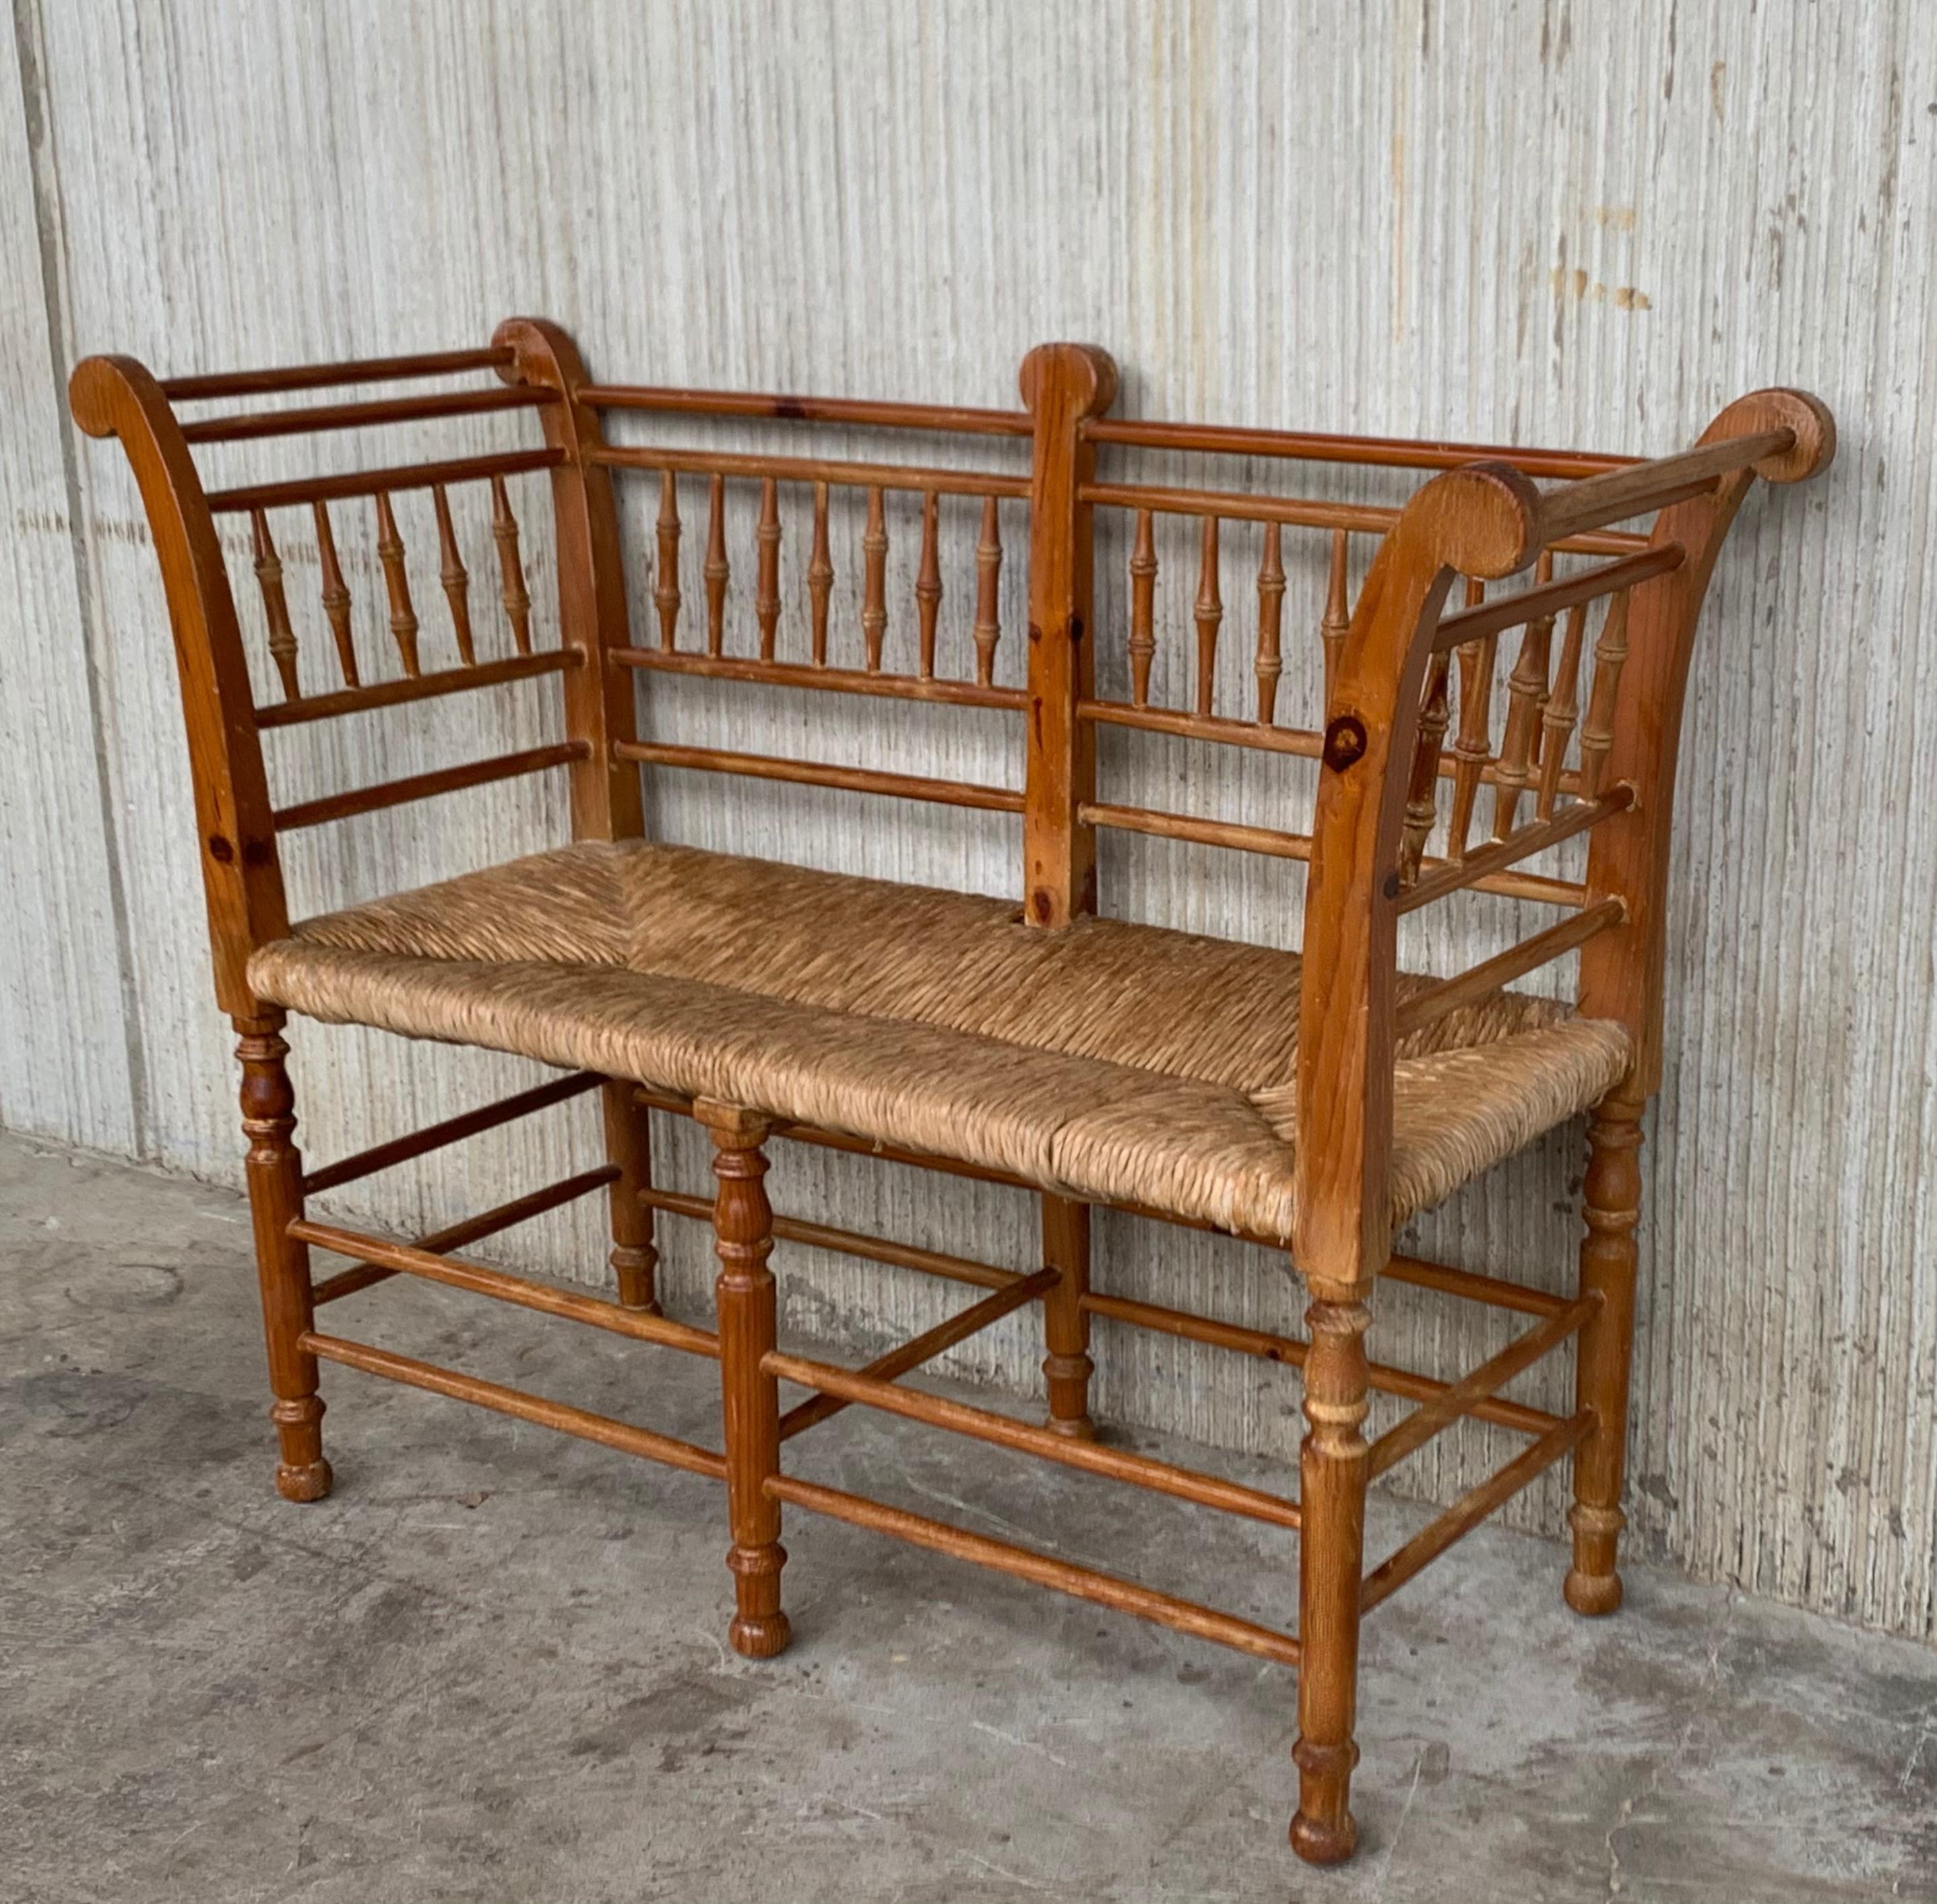 Midcentury sofa, settee or bench in the Spanish style with cane back and turned bars typical of this period. Shown in original condition, please note price includes refinishing.


 